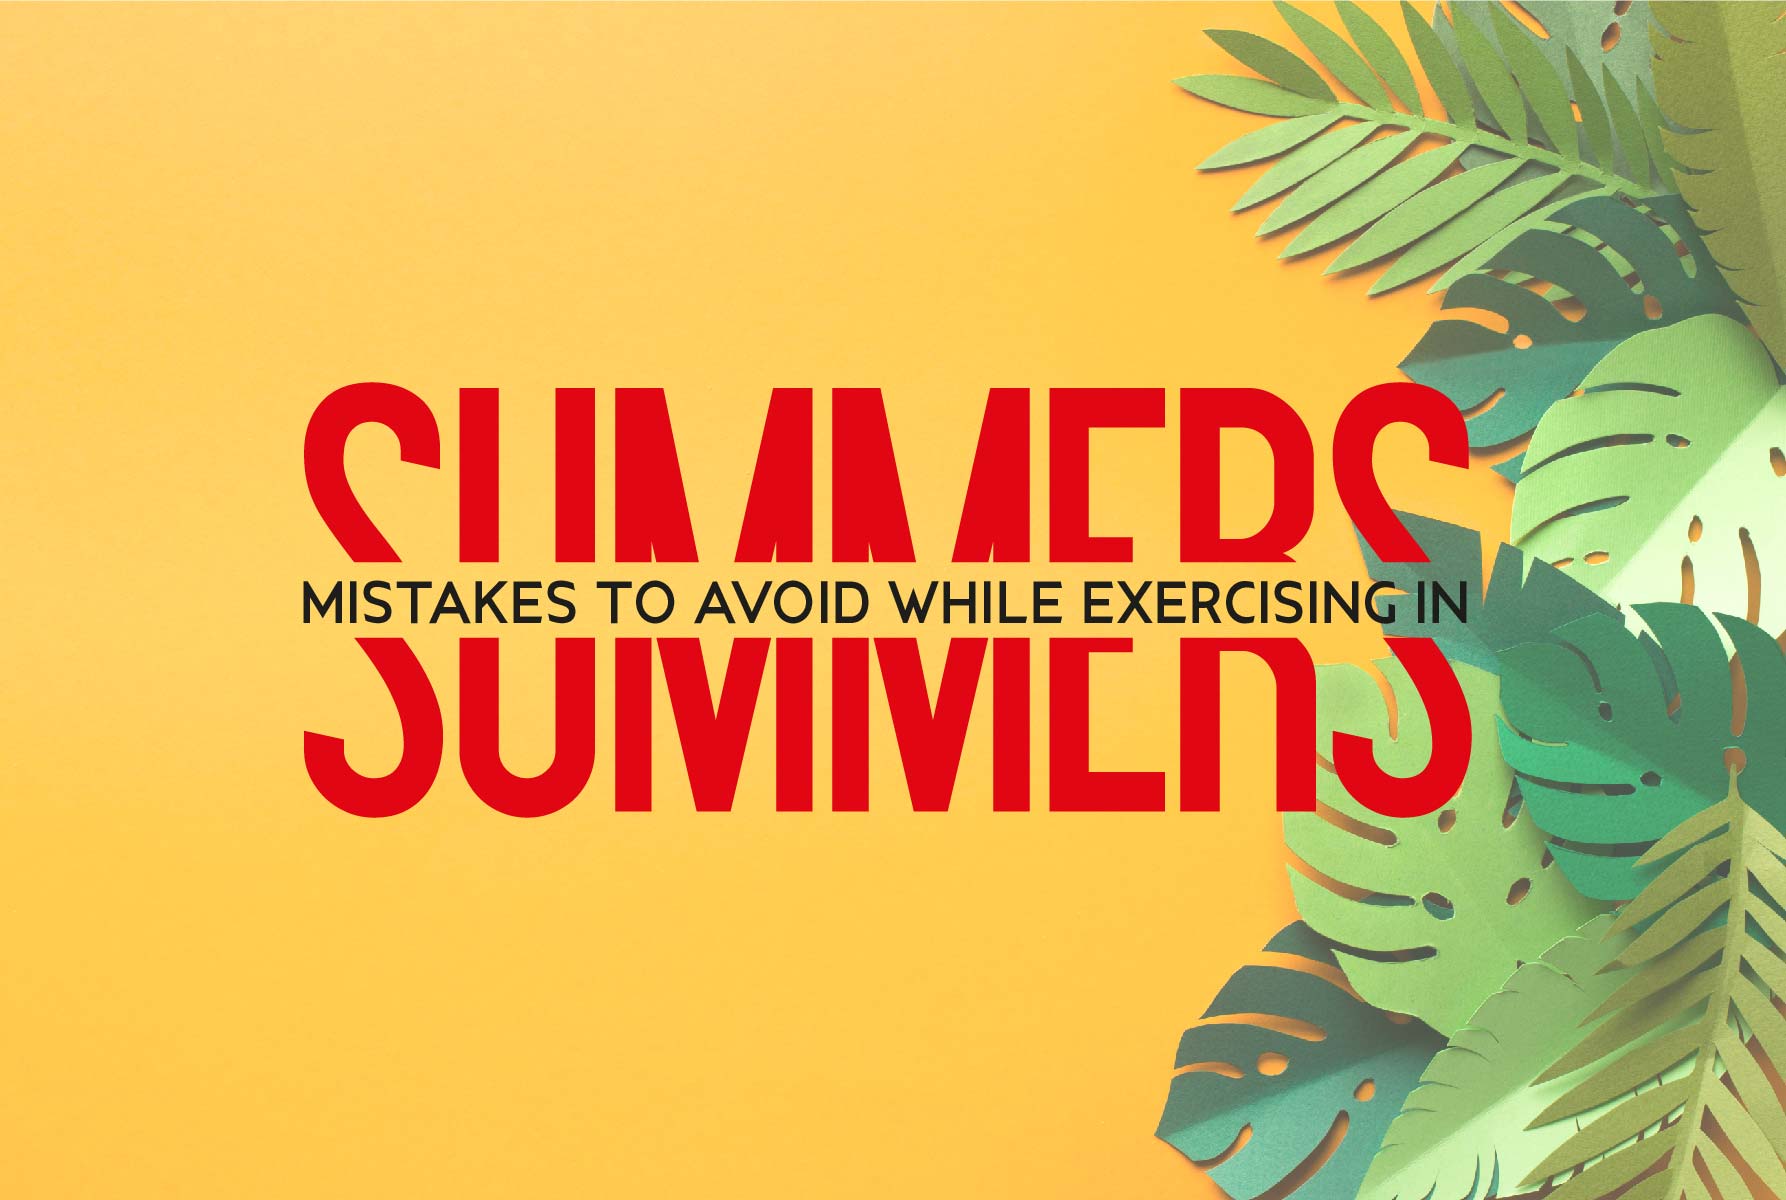 Mistakes to avoid while exercising in summers